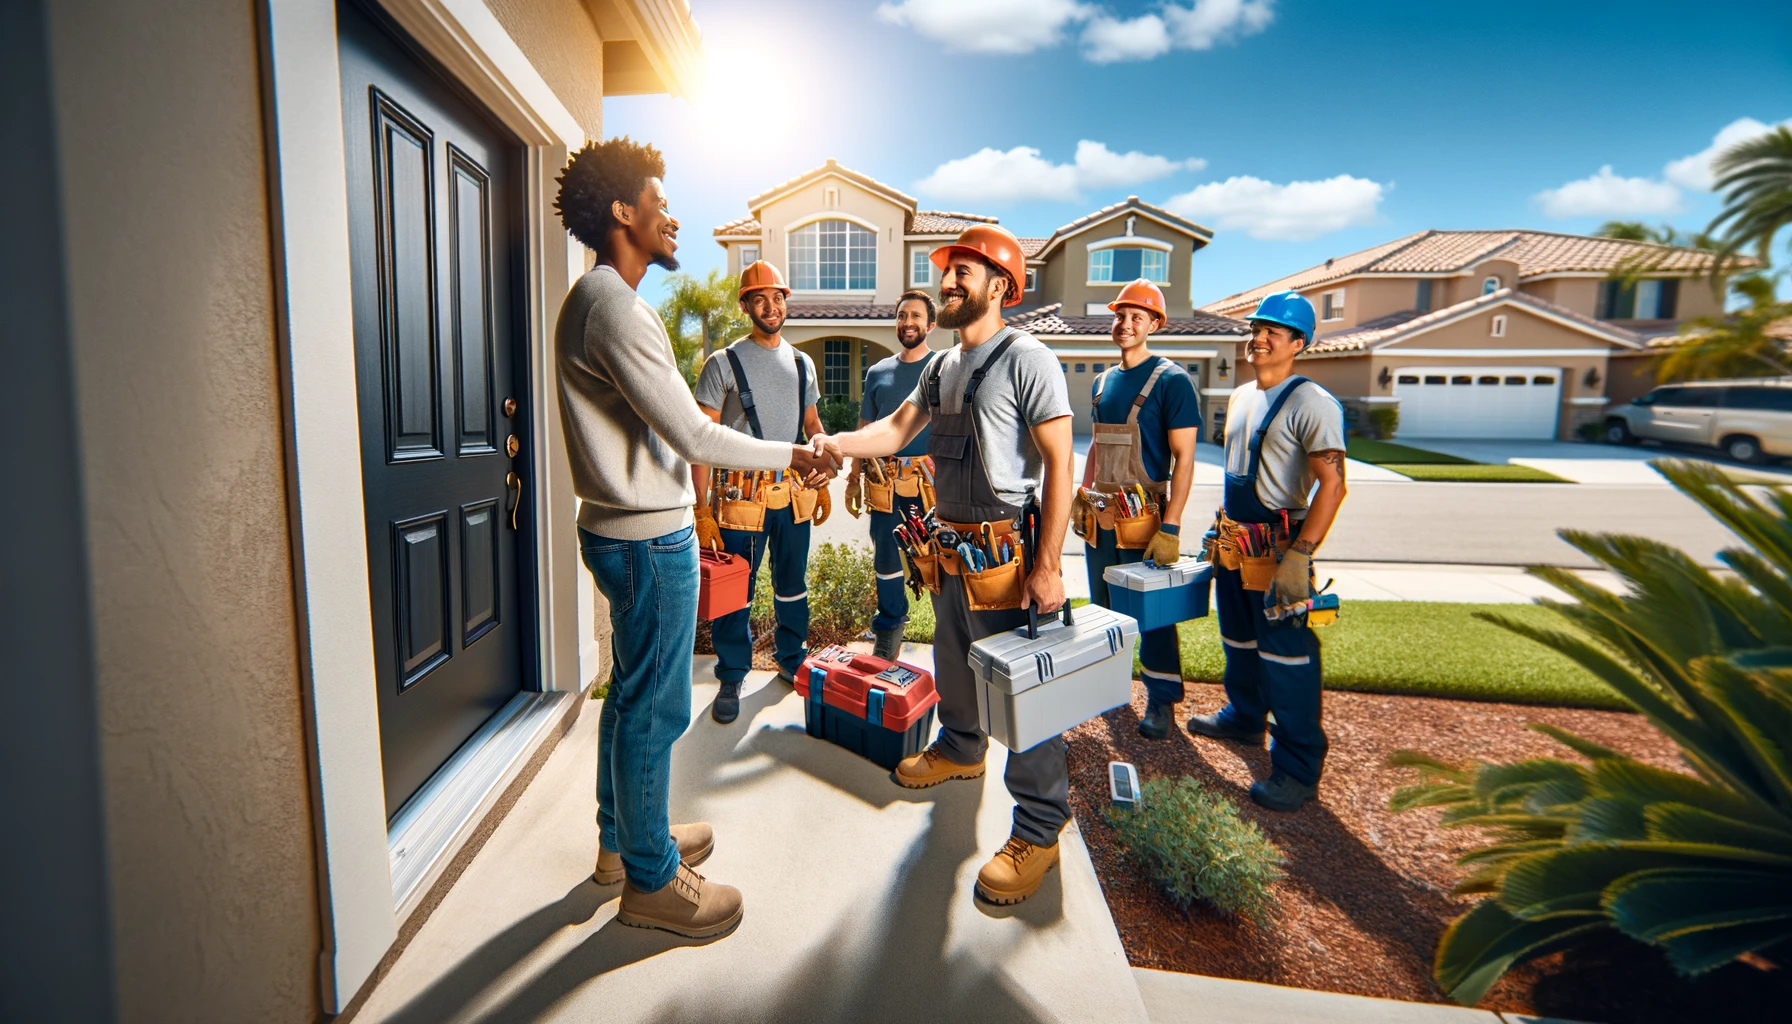 DALL·E 2024-01-02 15.19.51 - A wide landscape image of a homeowner of diverse descent greeting an installation crew who has arrived to install new impact doors. The scene depicts 